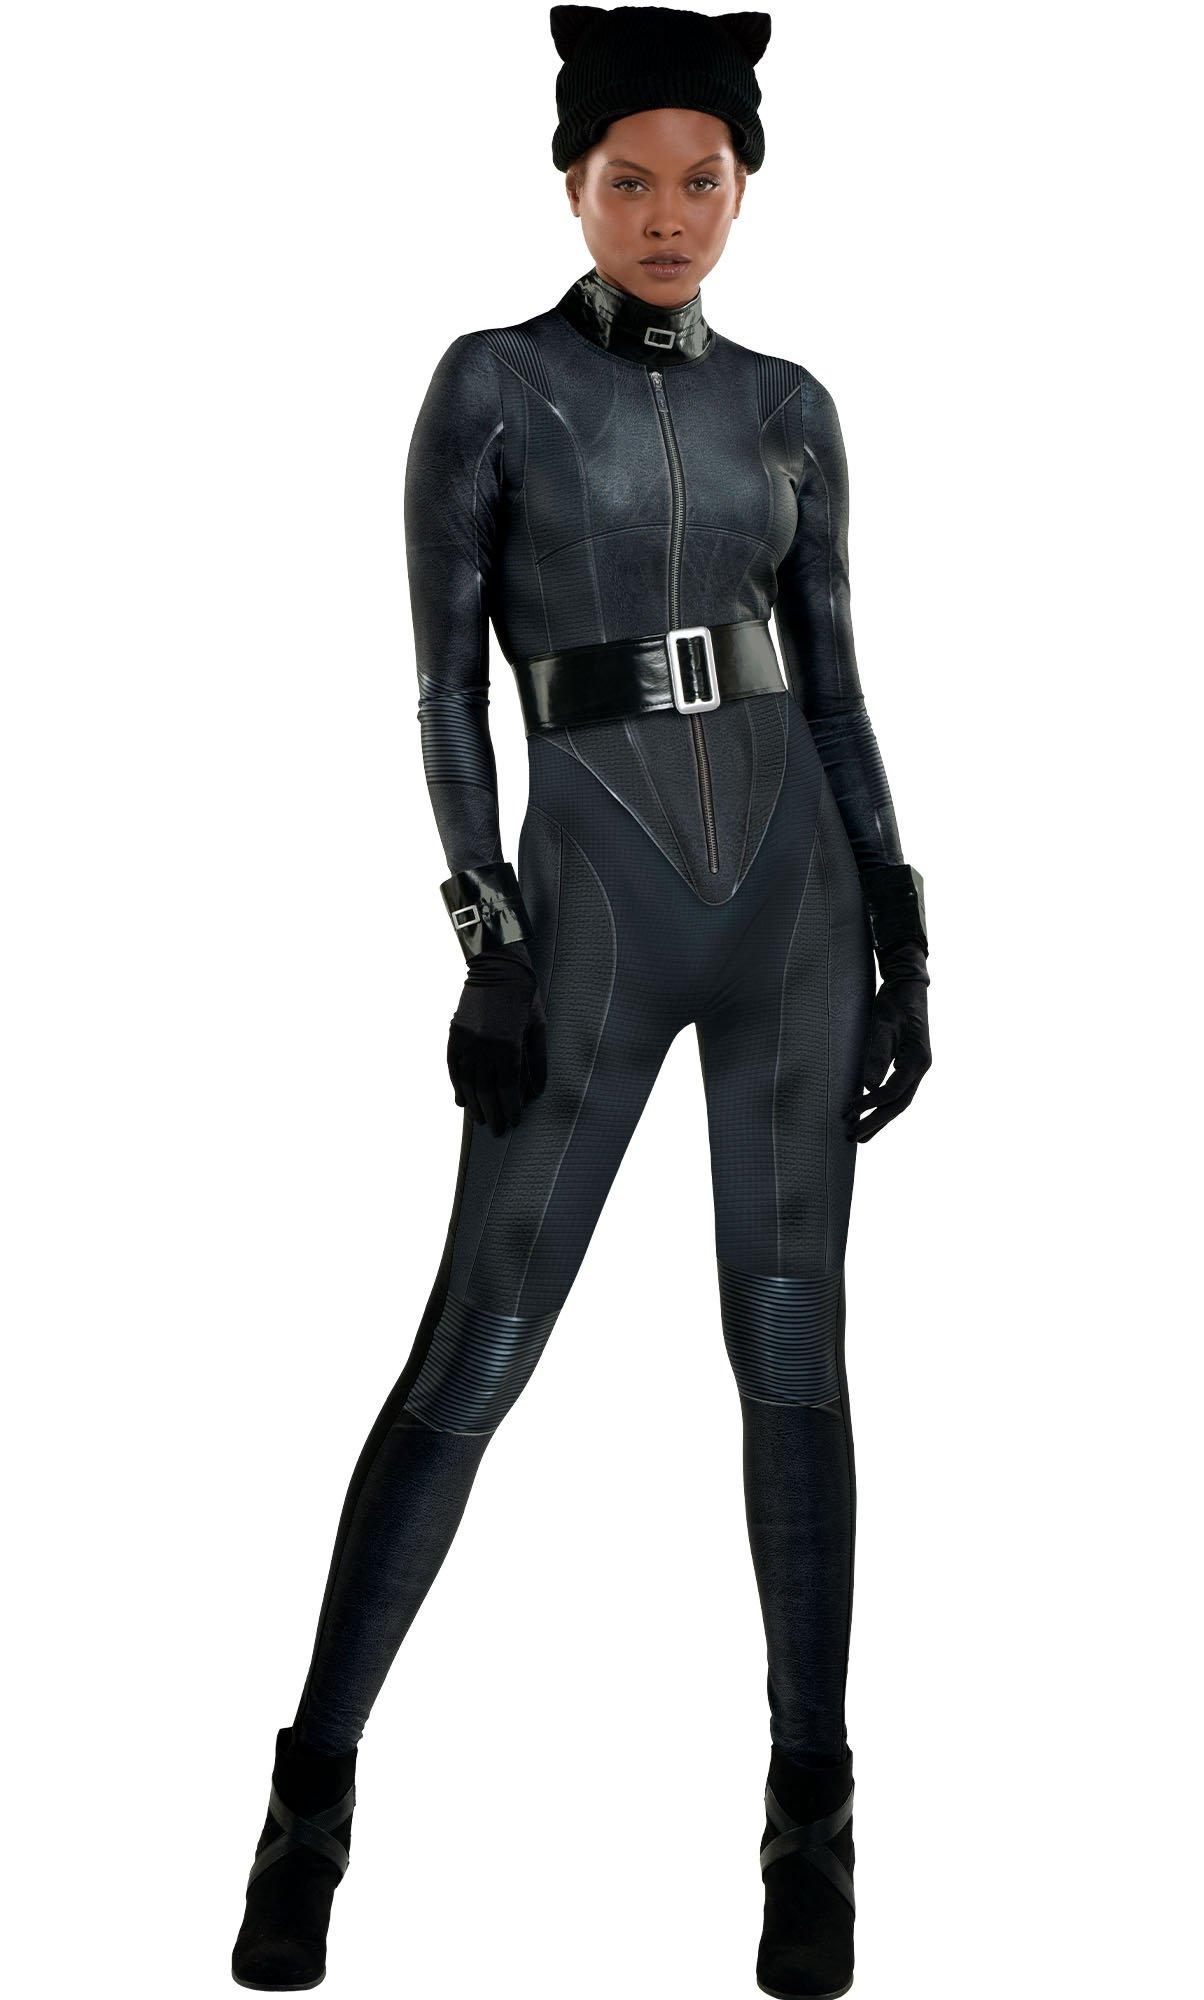 How to Make a Catwoman Costume With Household Supplies